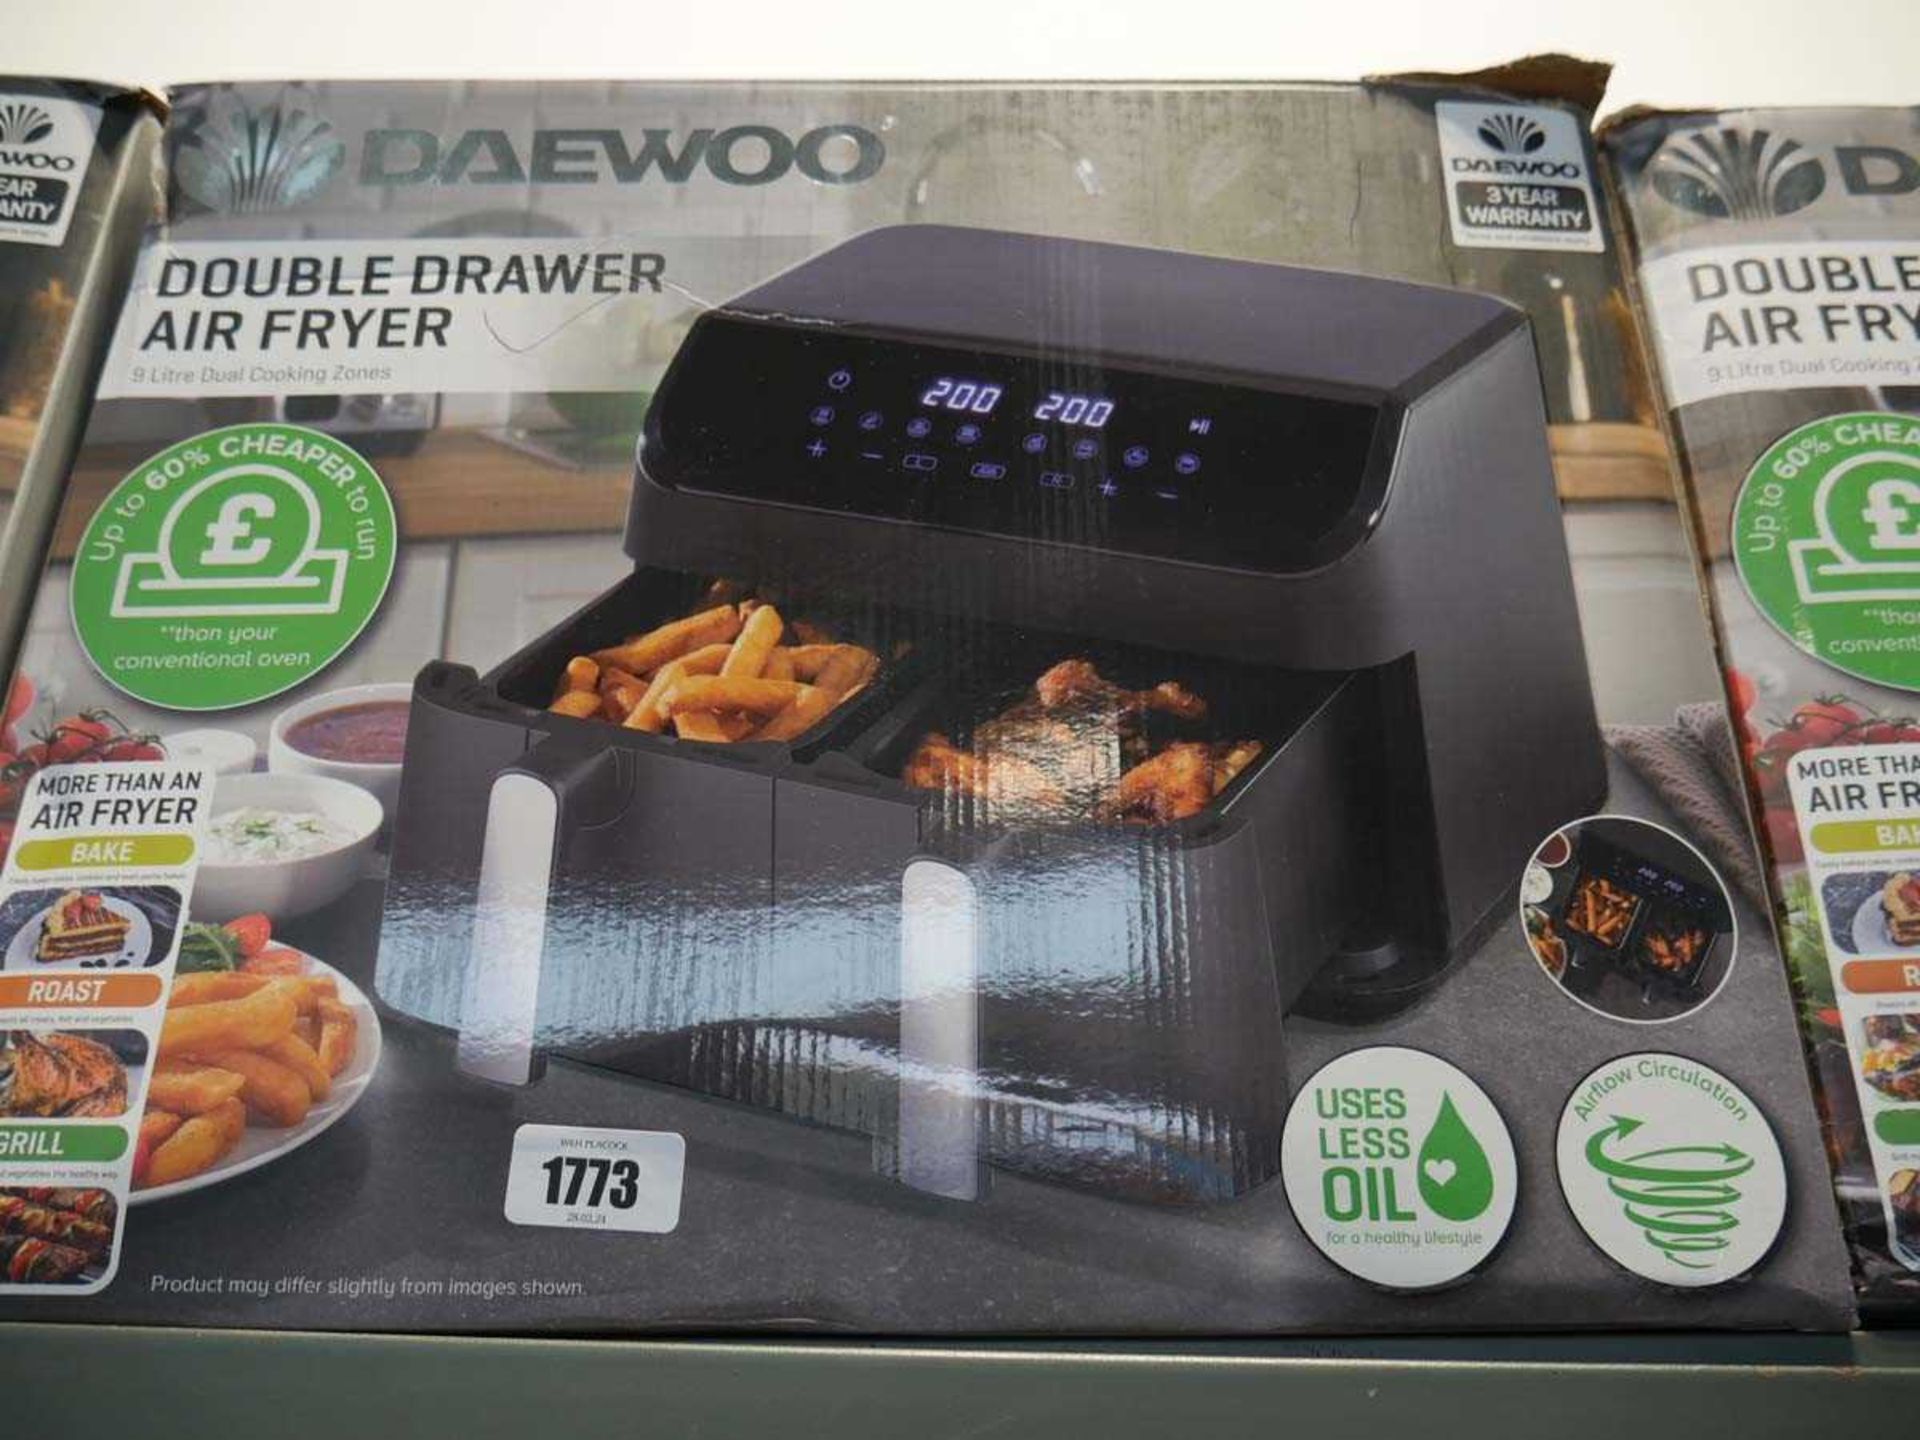 Boxed Daewoo double drawer 9L air fryer